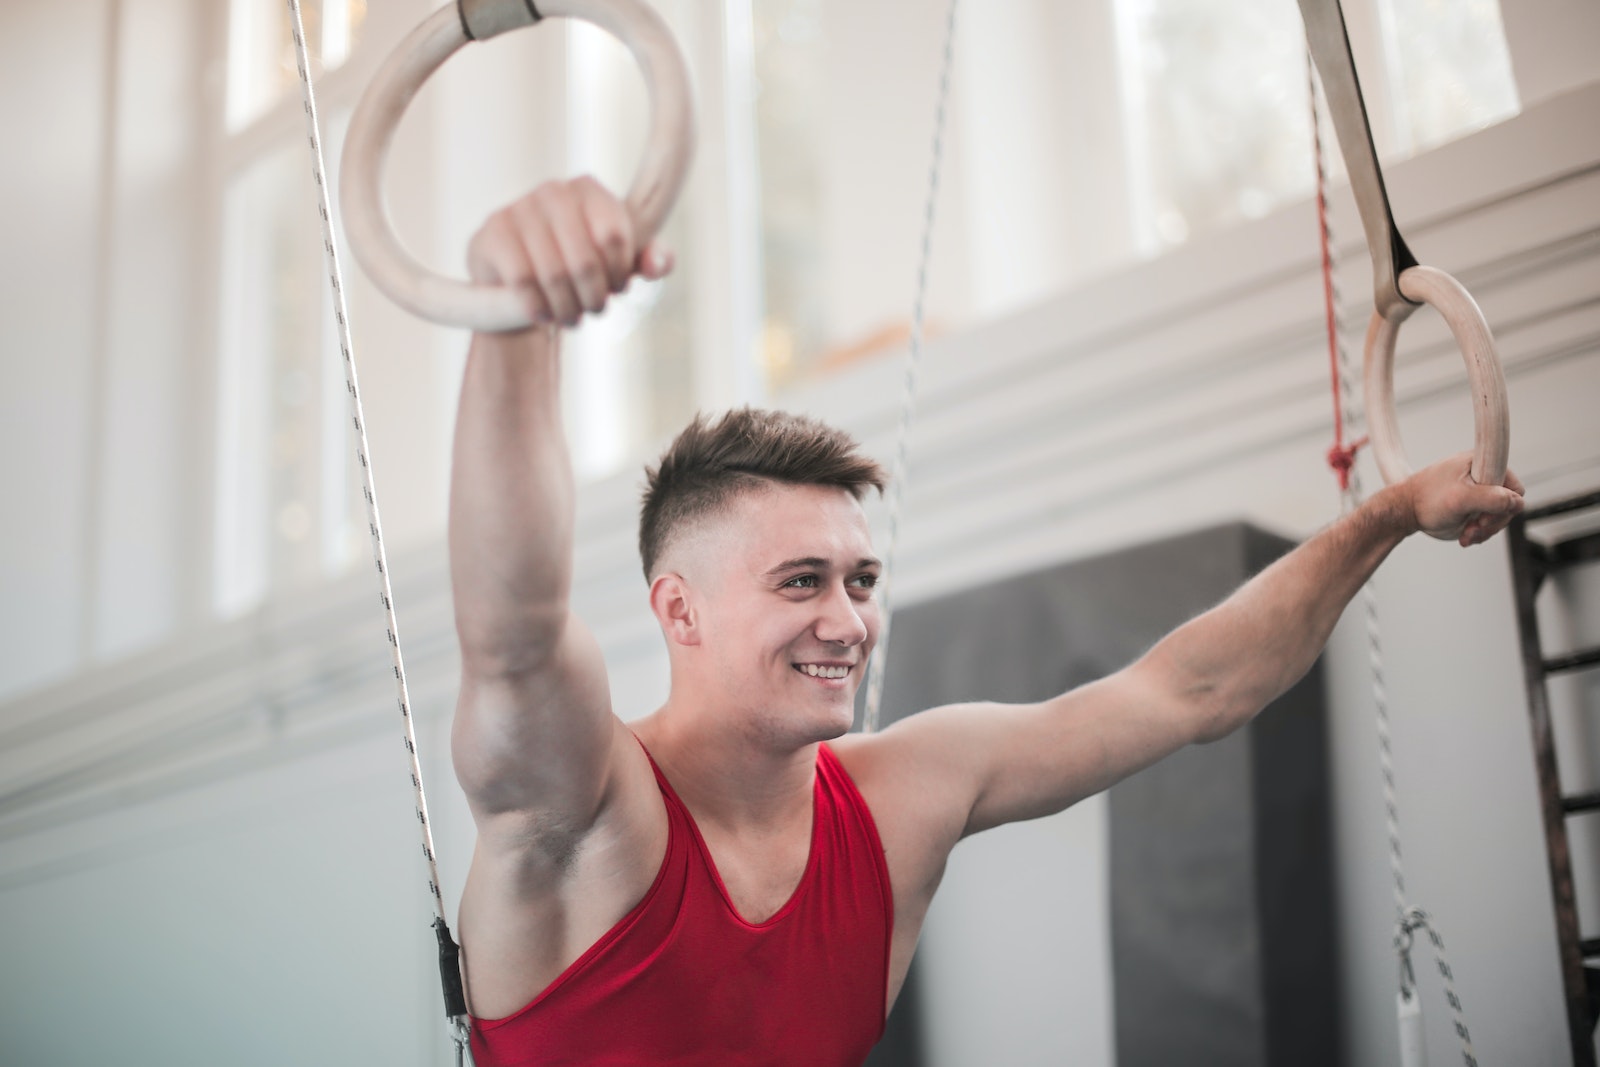 Ring Workout Handsome man smiling and holding gymnastic rings